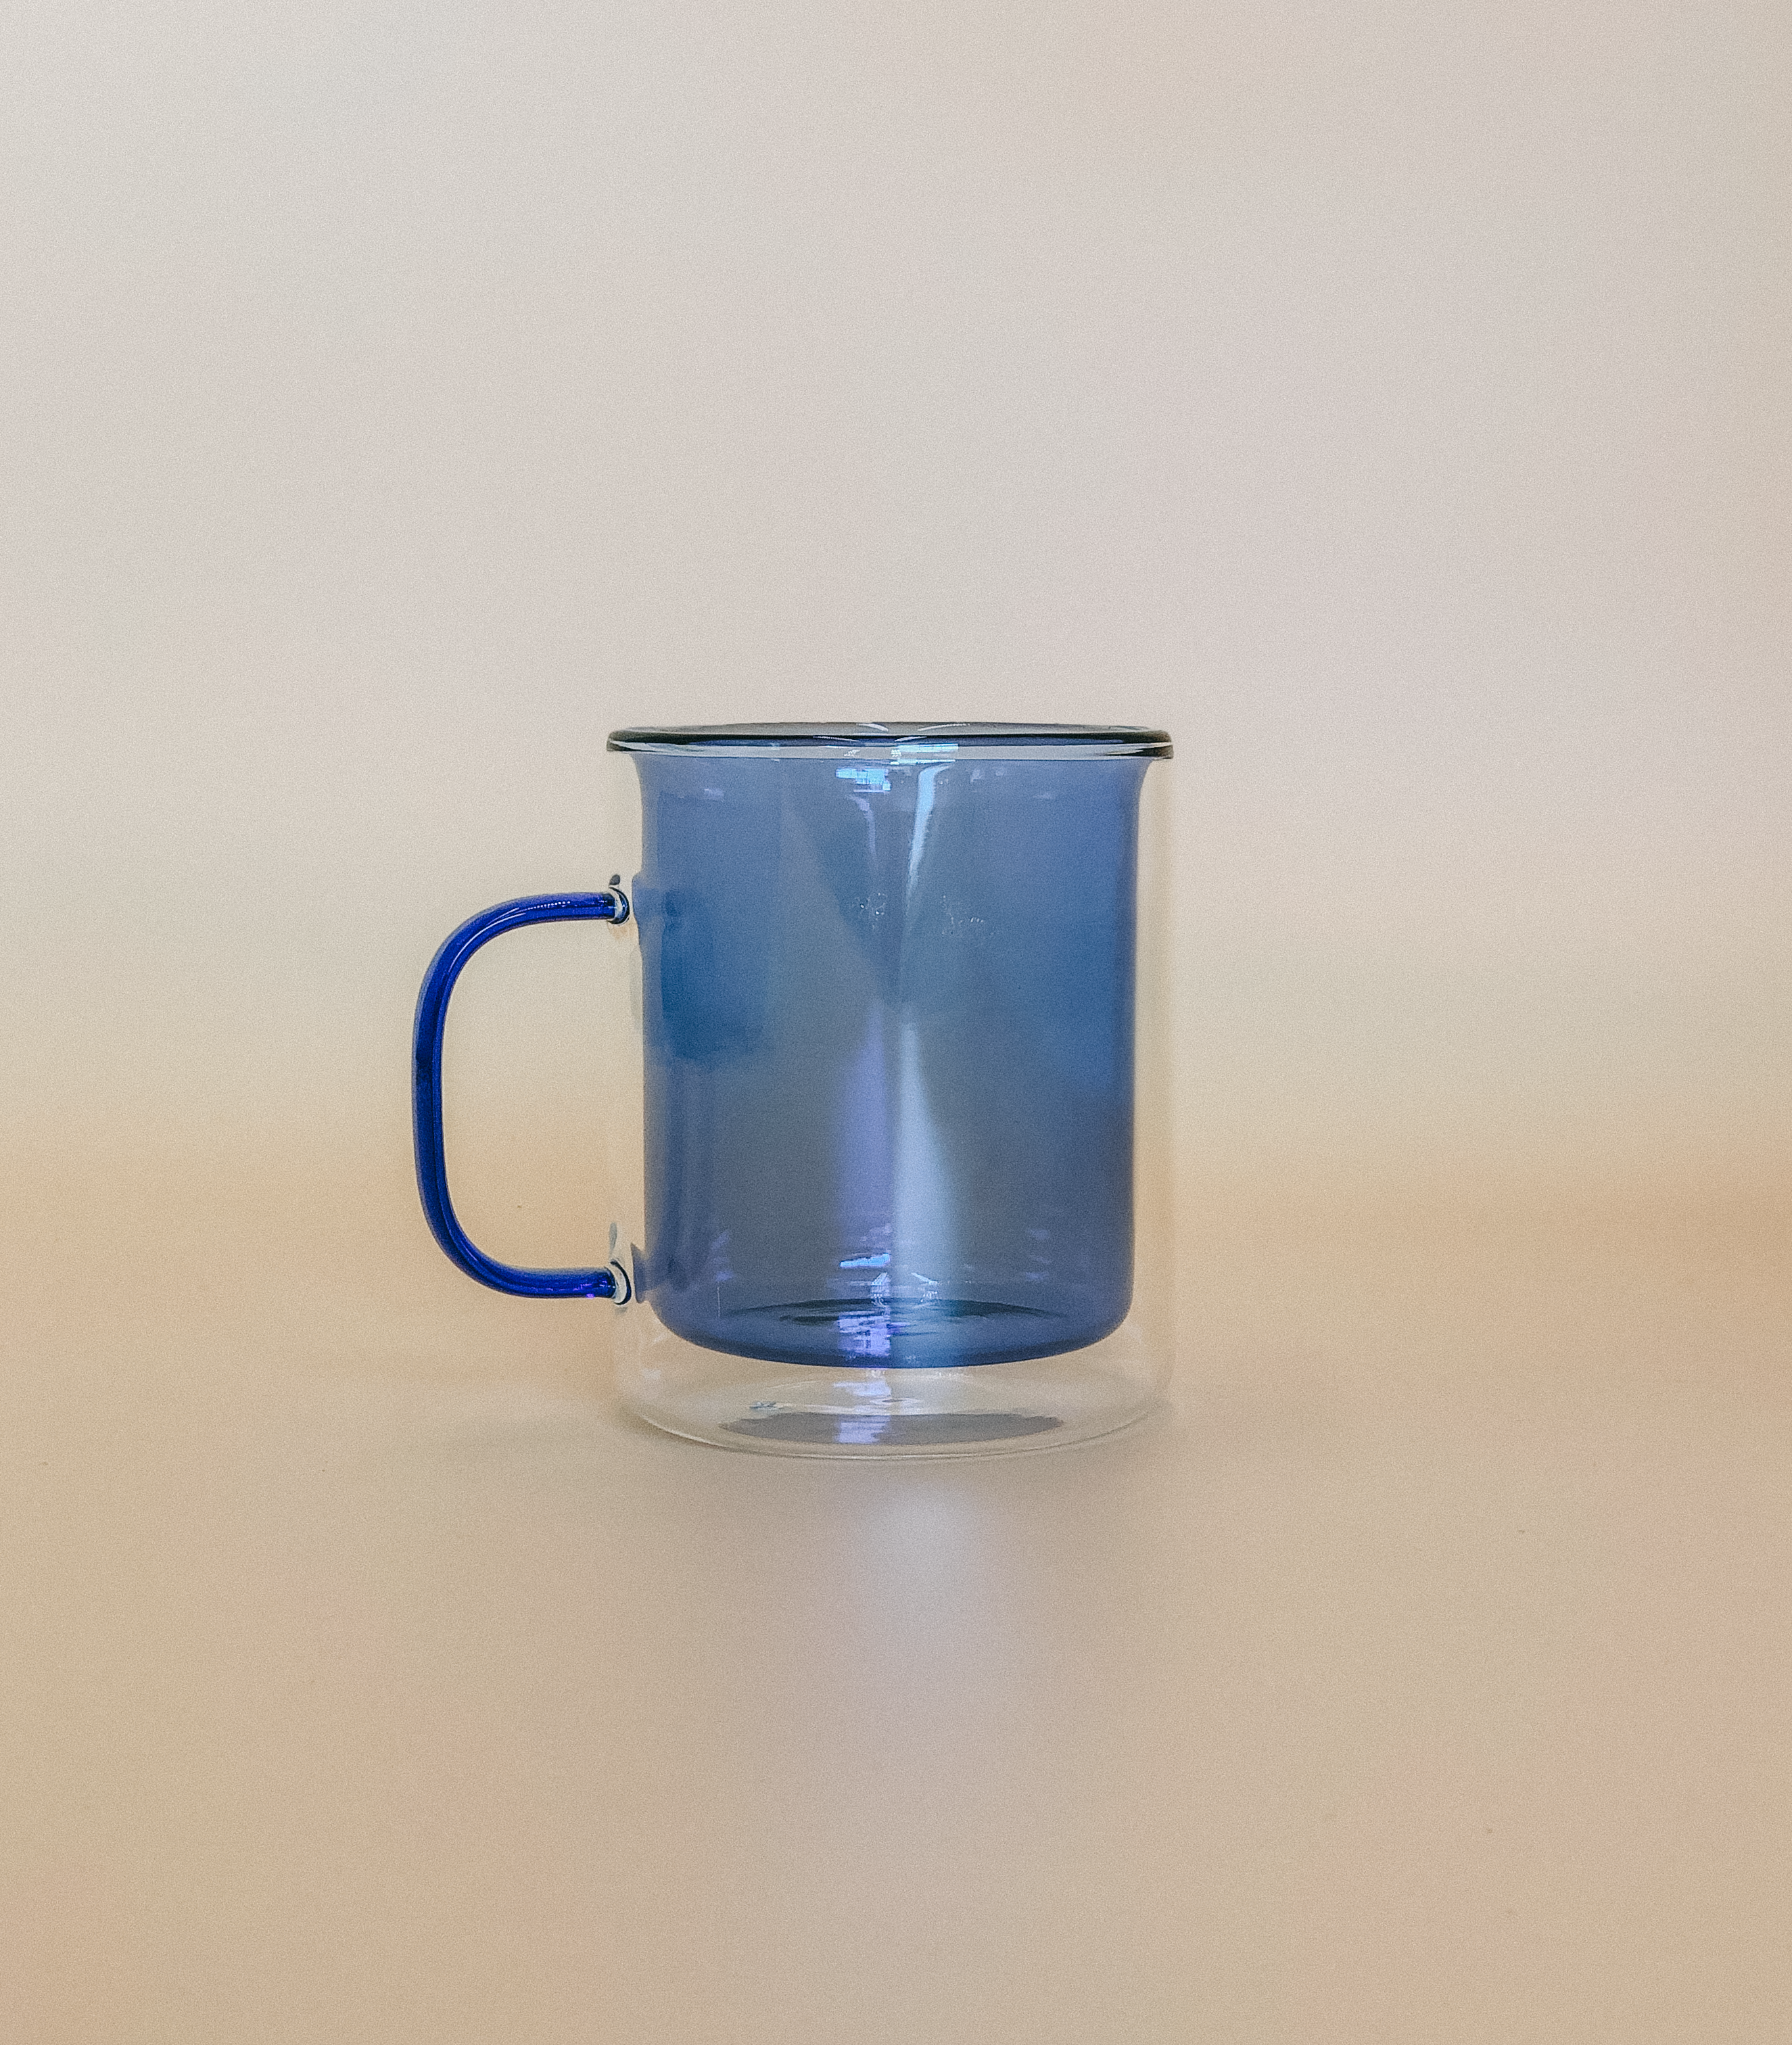 Insulated Coffee Mug by PROSE Tabletop